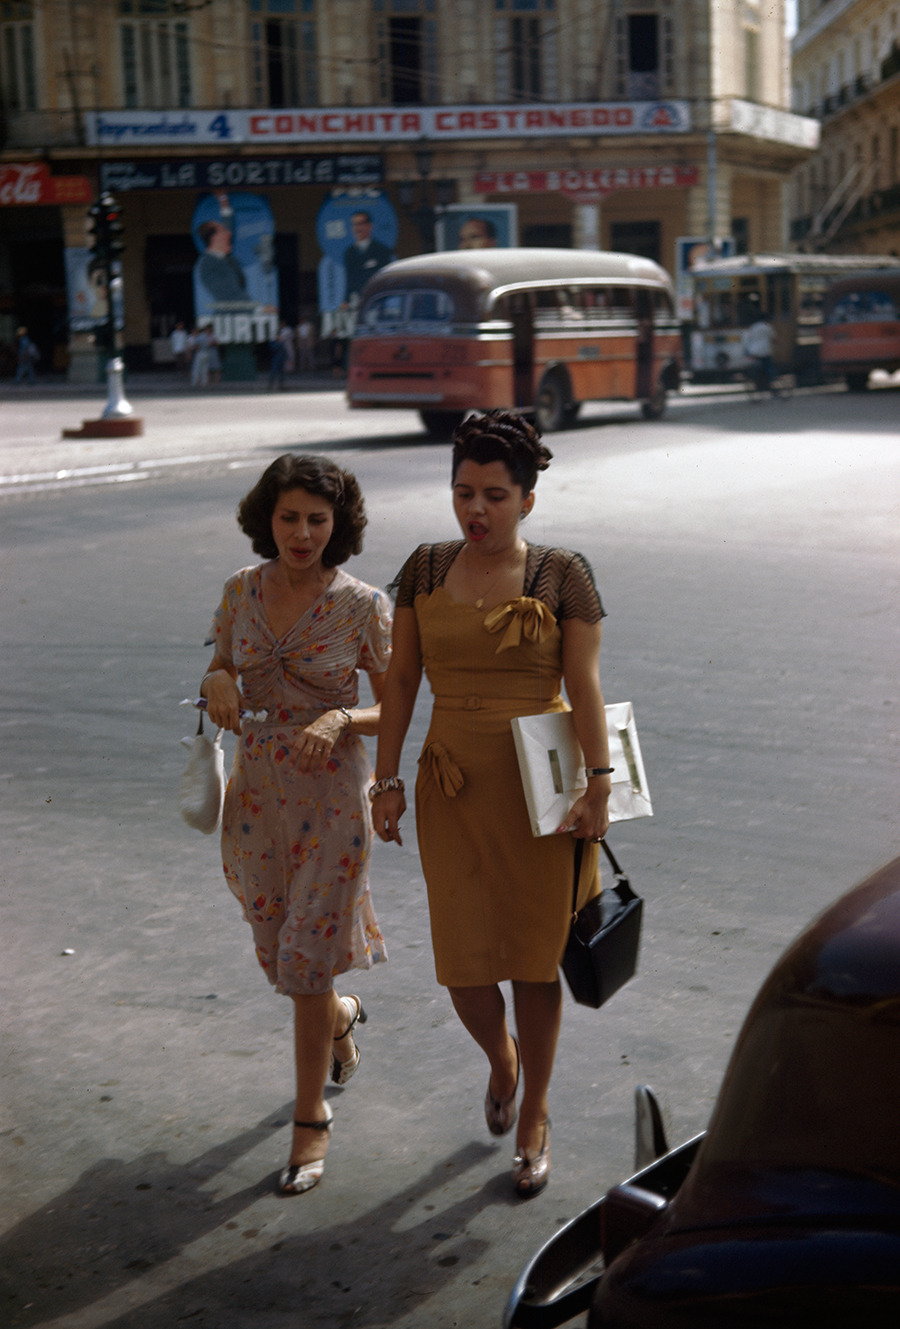 Two women on a shopping trip walk across a street in Havana, Cuba, 1947.Photograph by Melville B. Grosvenor, National Geographic Creative